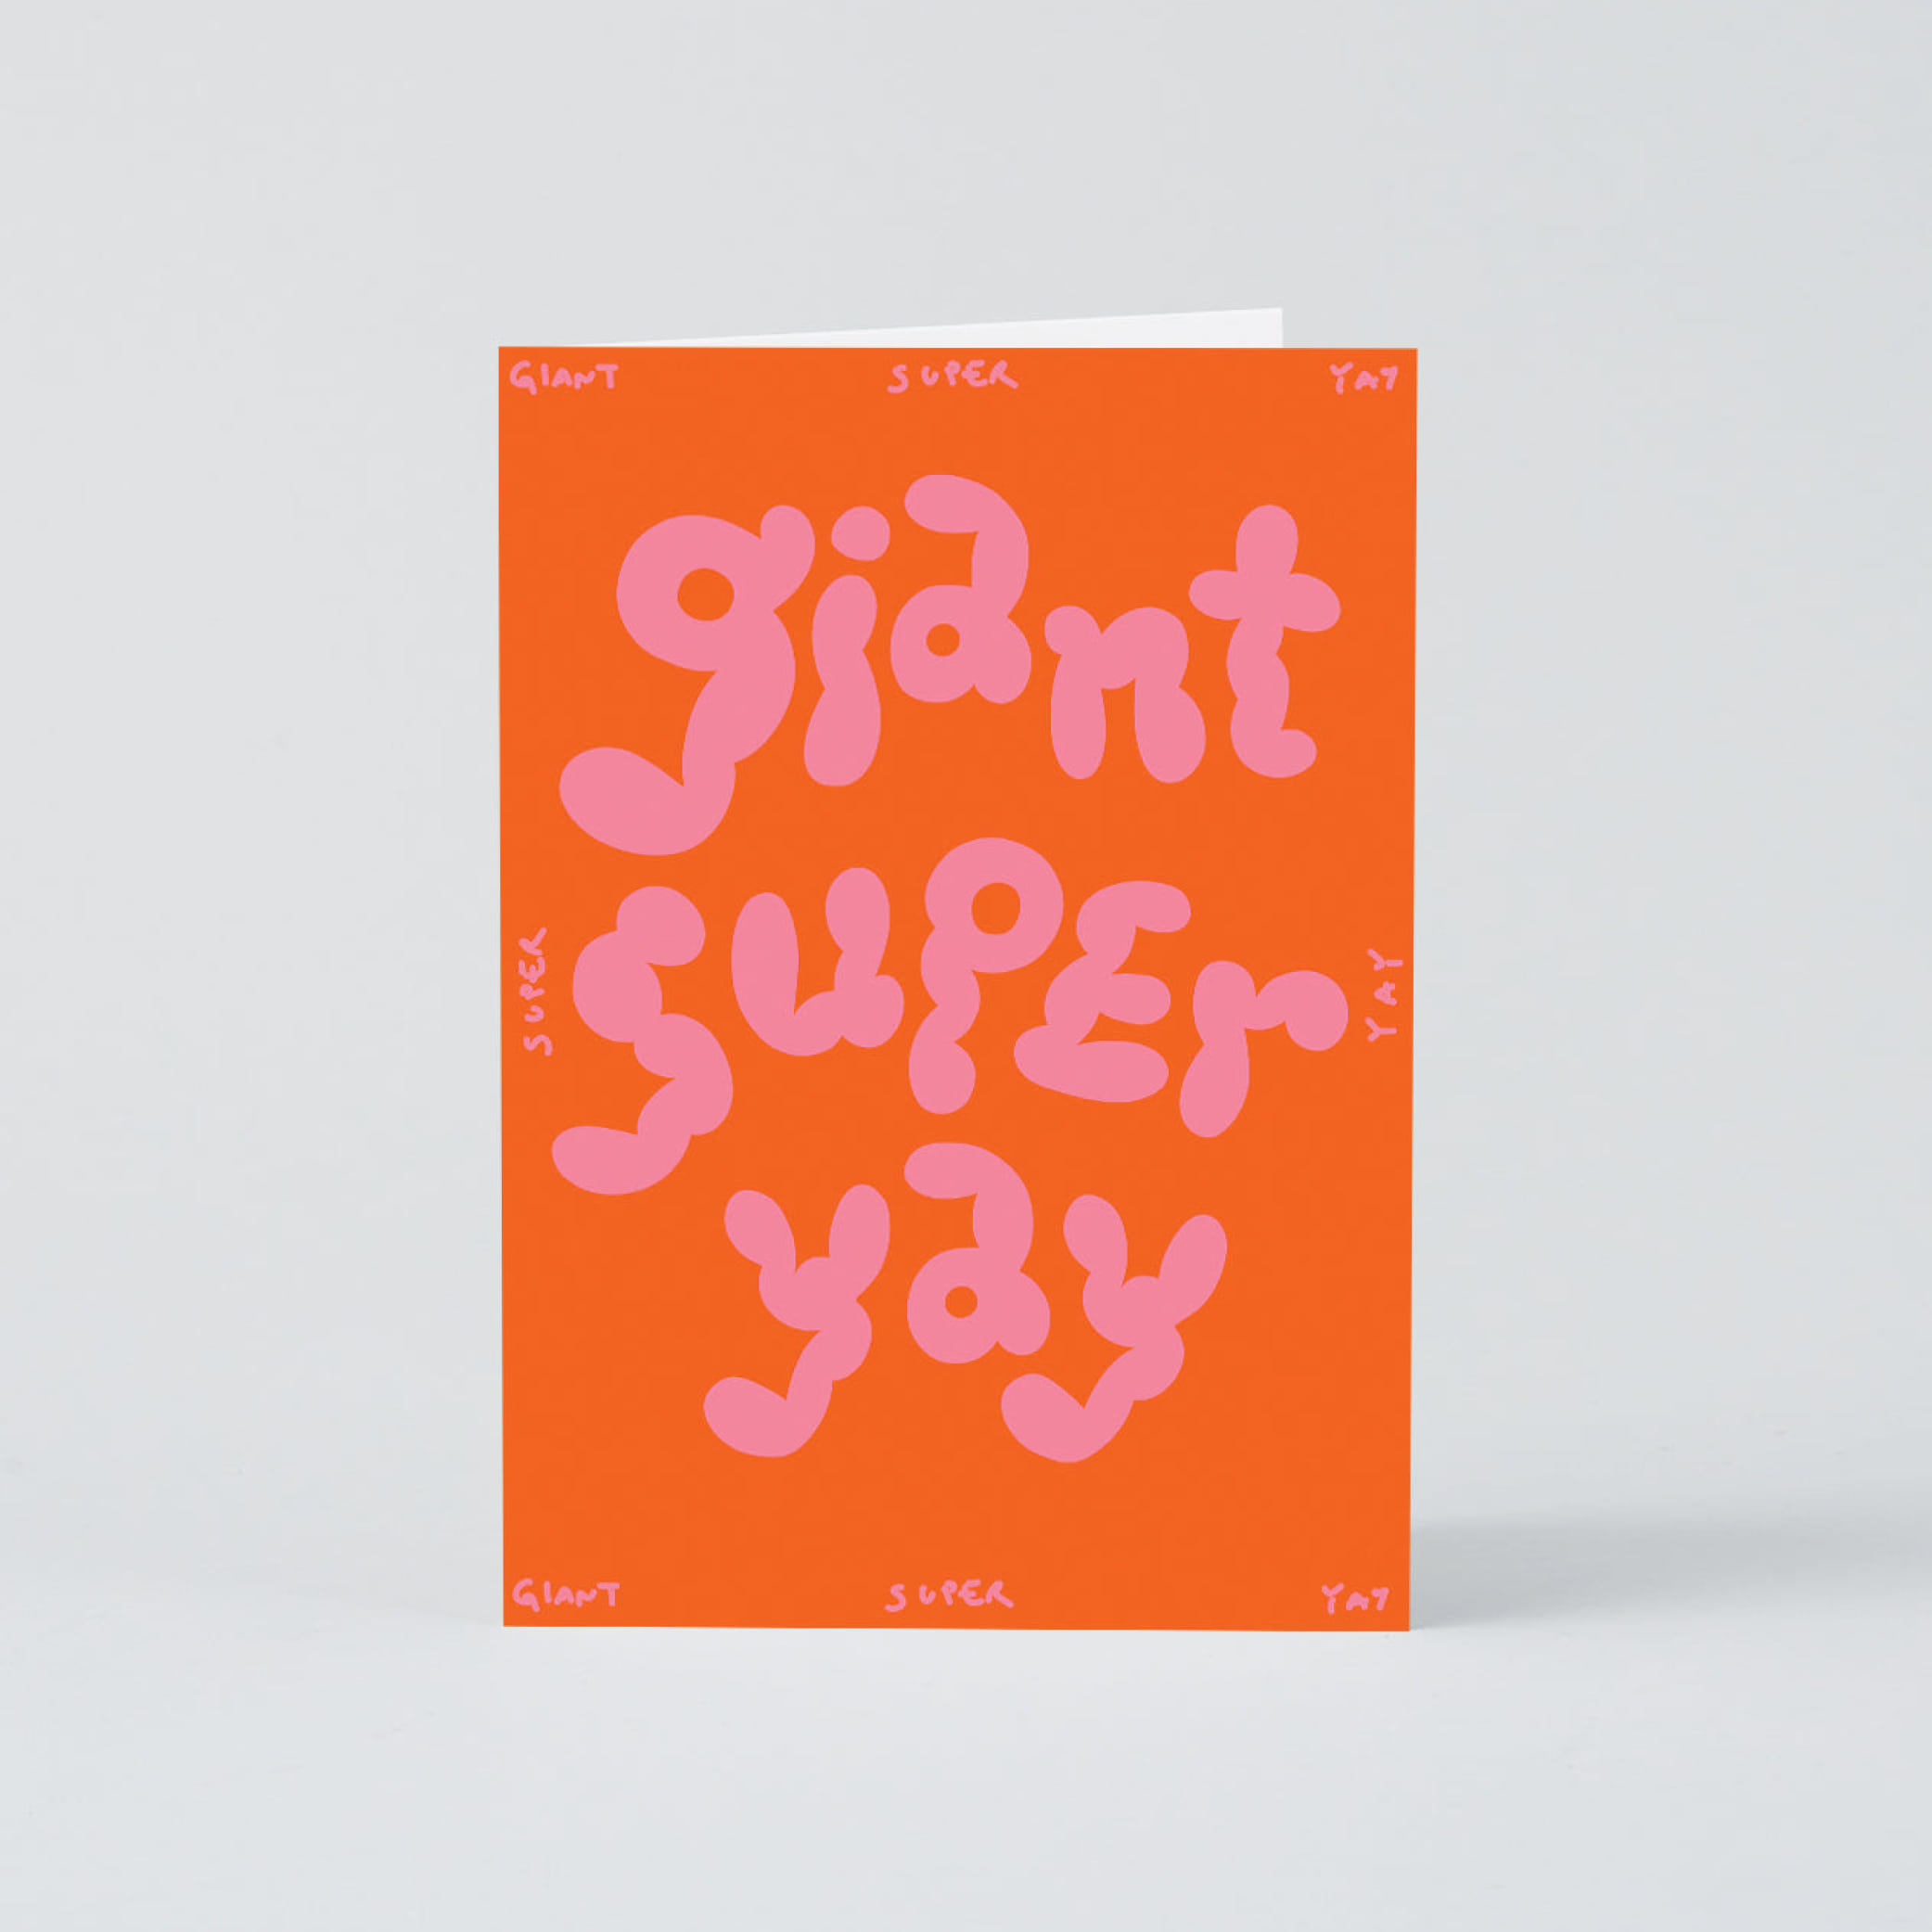 [WRAP] Giant Super Yay Embossed Greetings Card